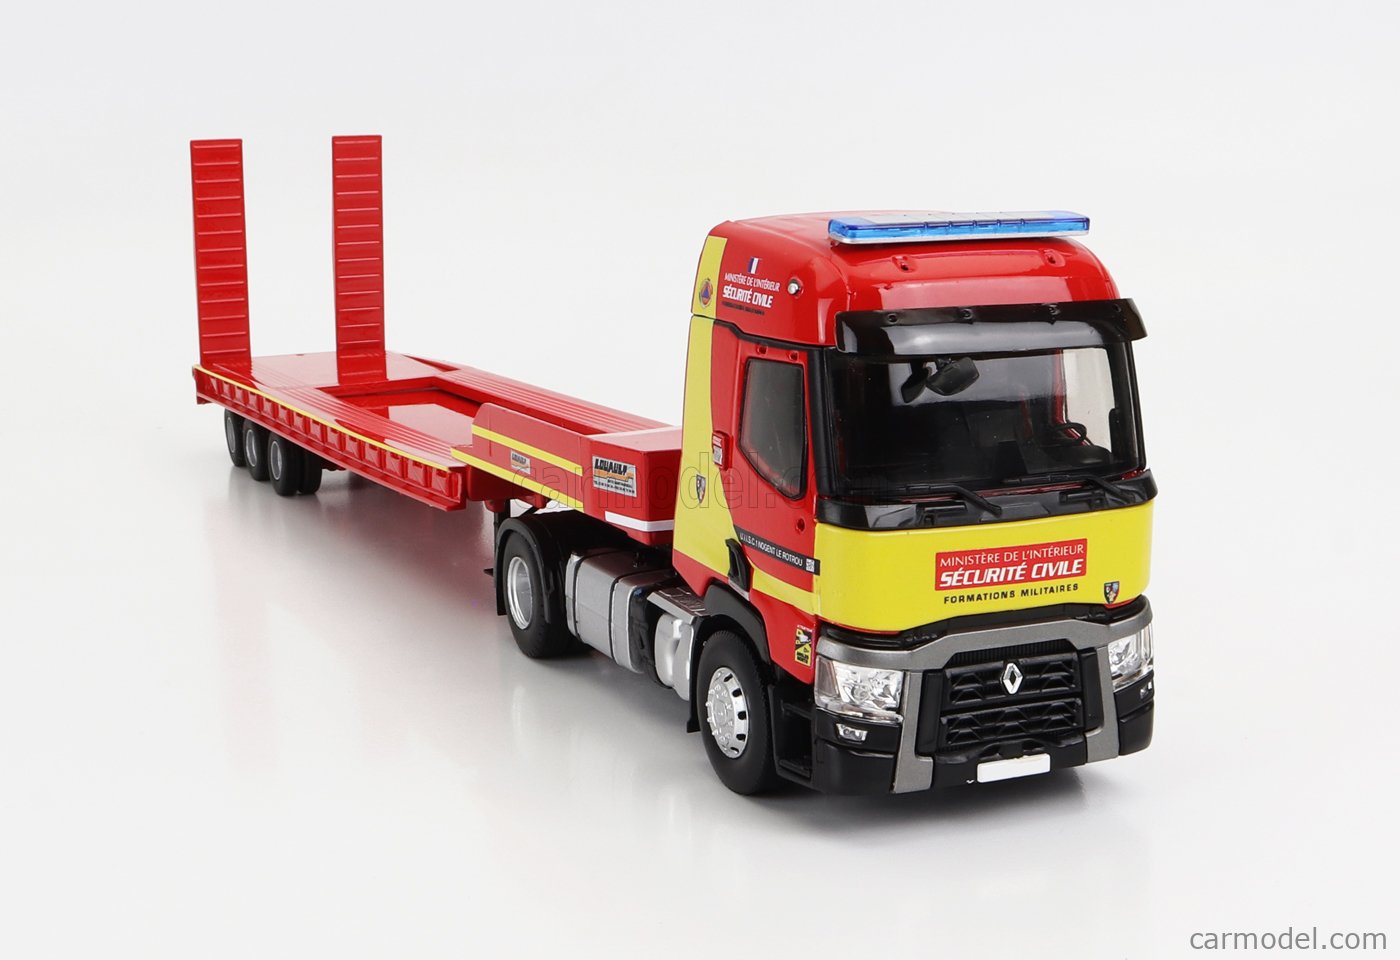 ELIGOR 117204 Scala 1/43  RENAULT T460 TRUCK PIANALE SECURITE CIVILE 2018 RED YELLOW